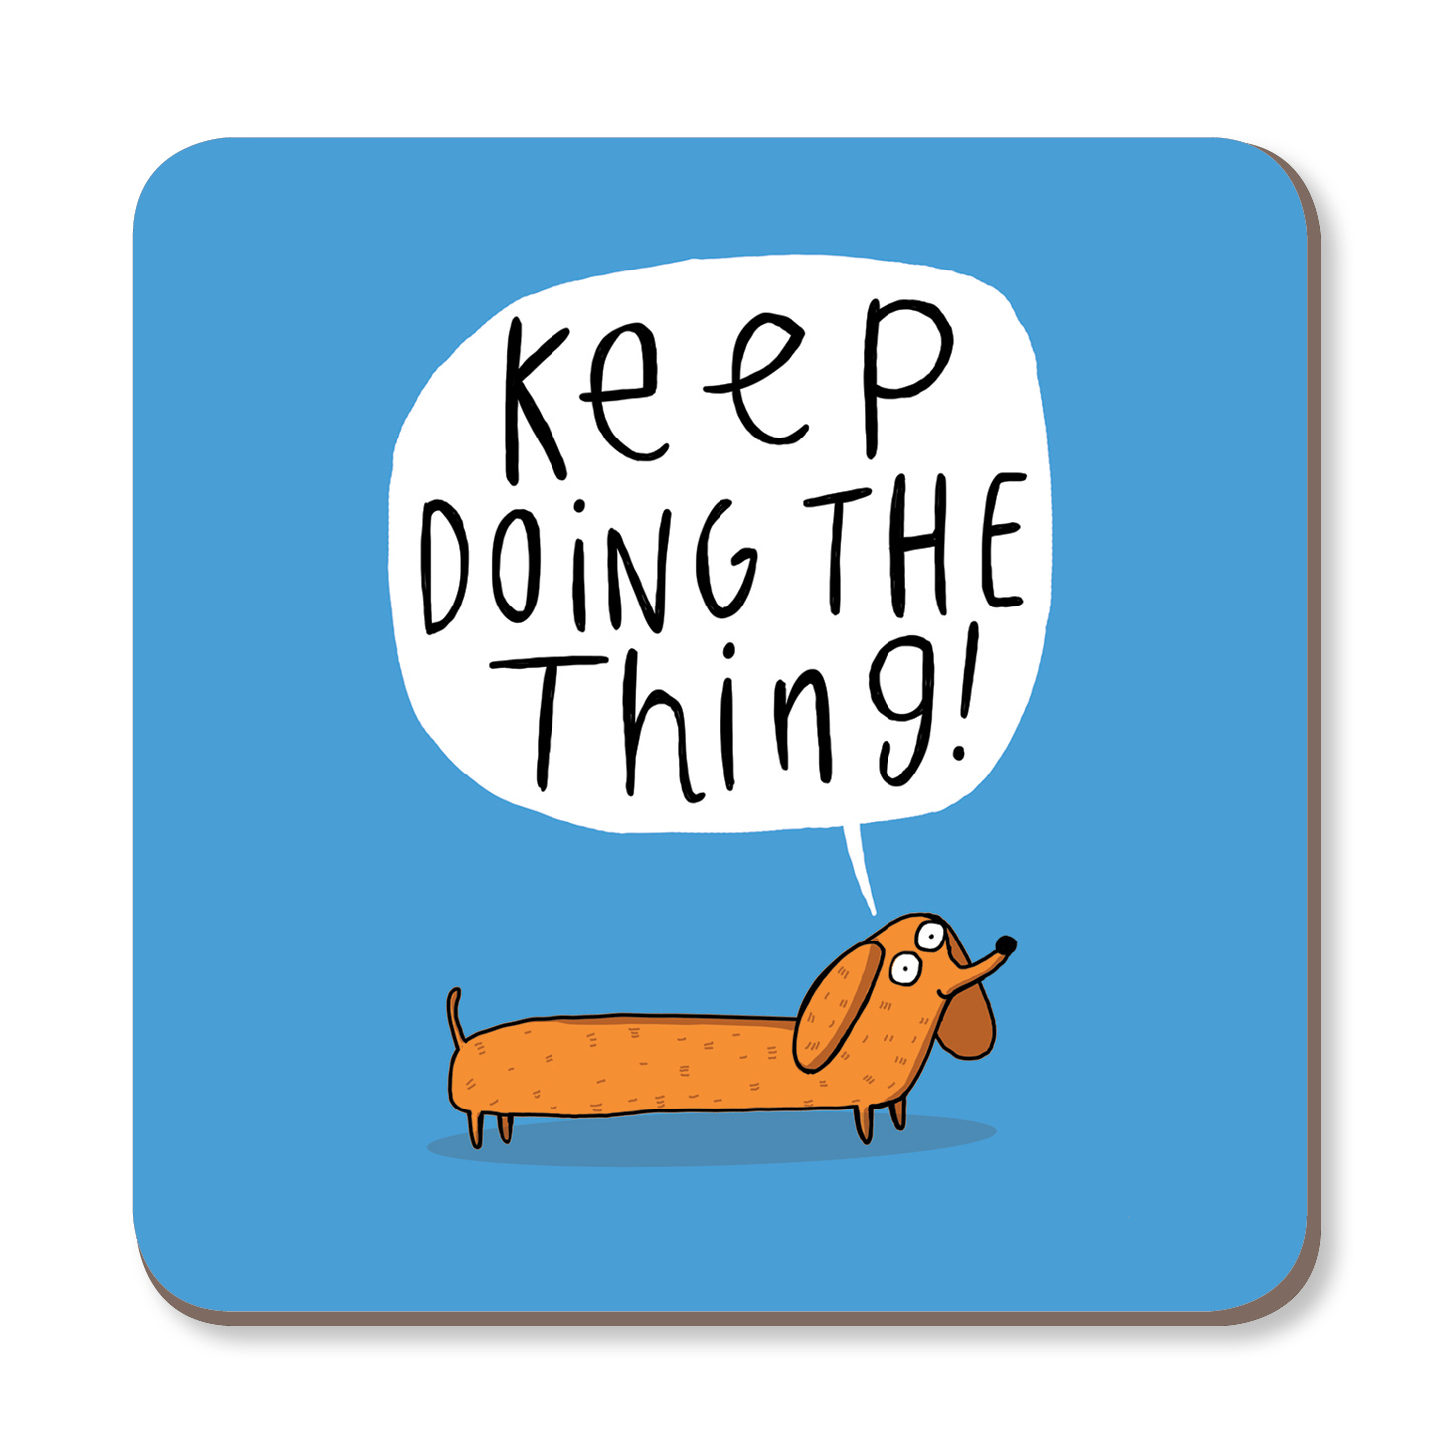 Keep Doing The Thing Coaster by Katie Abey - Whale and Bird